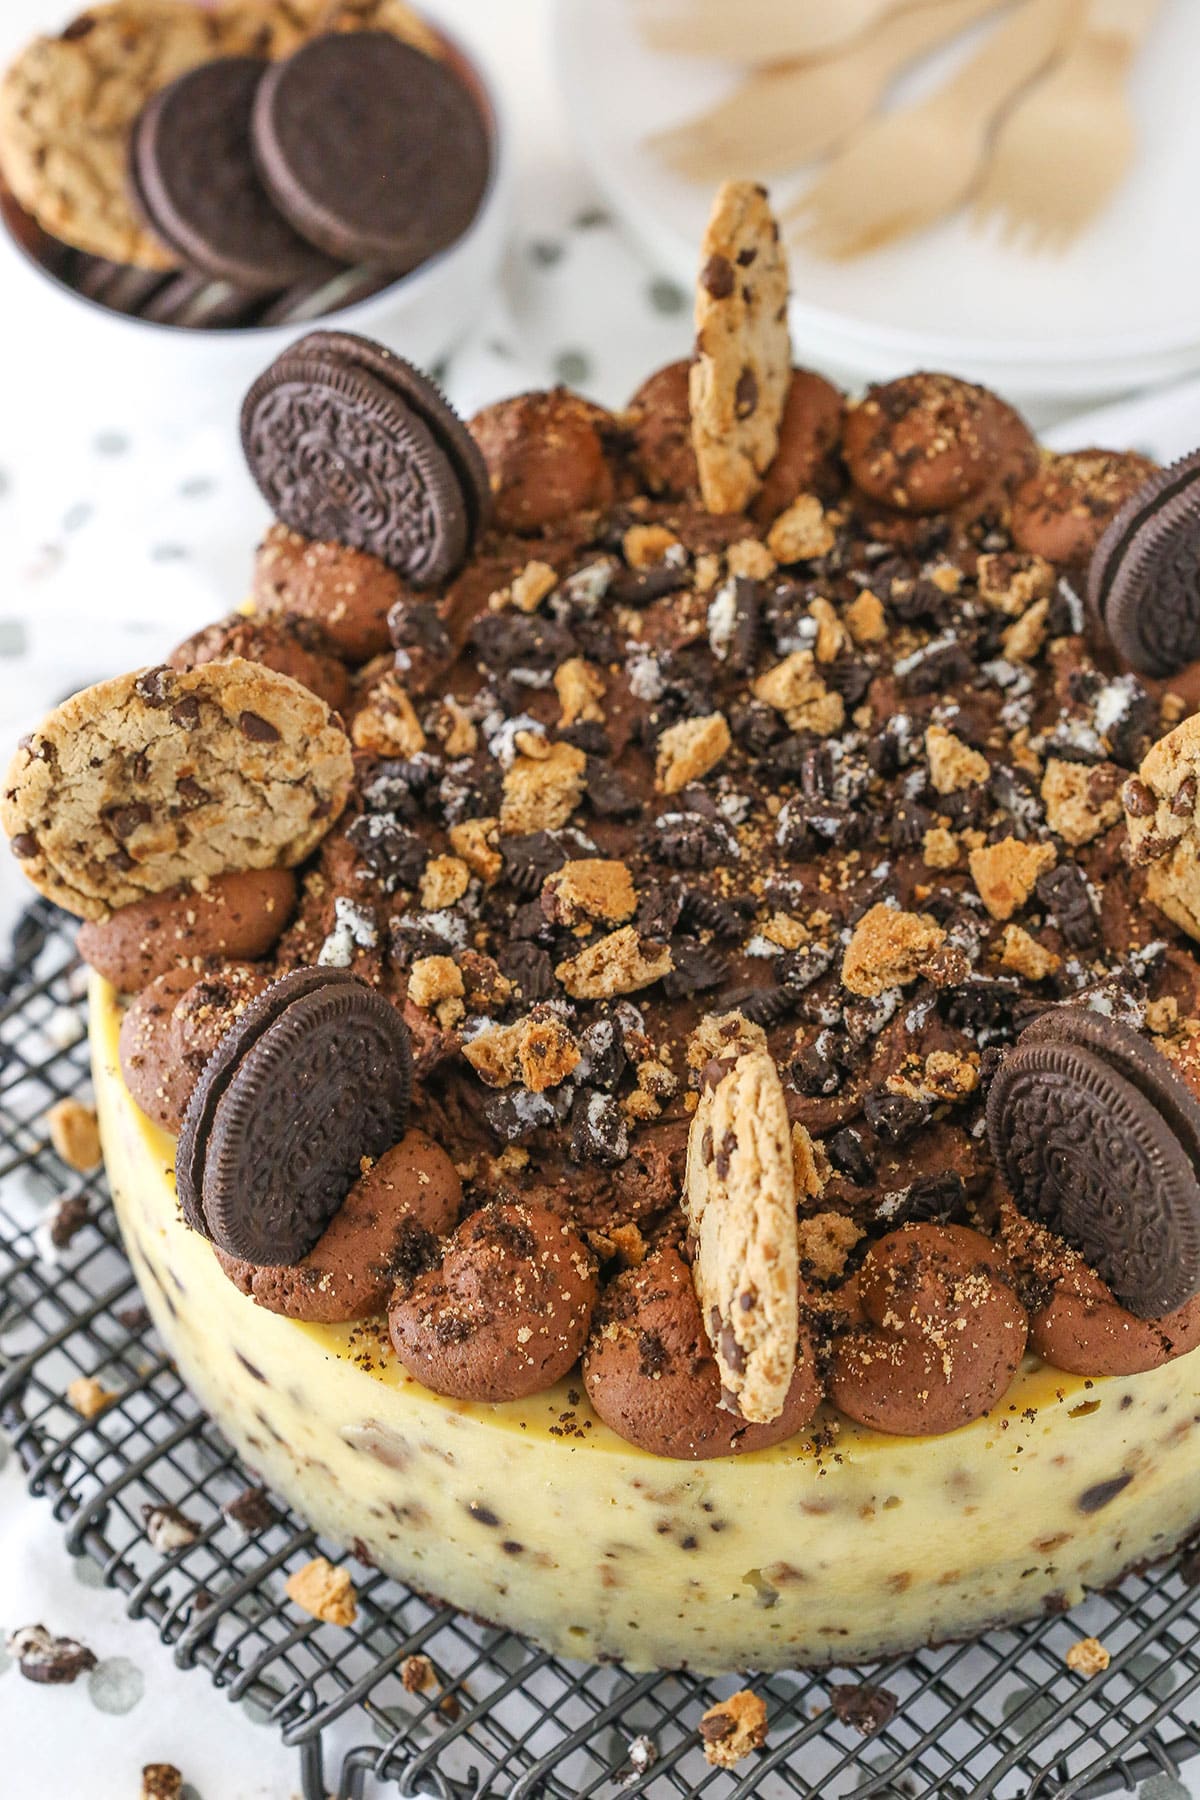 Overhead view of an Oreo Brookie Cheesecake on a metal cake stand